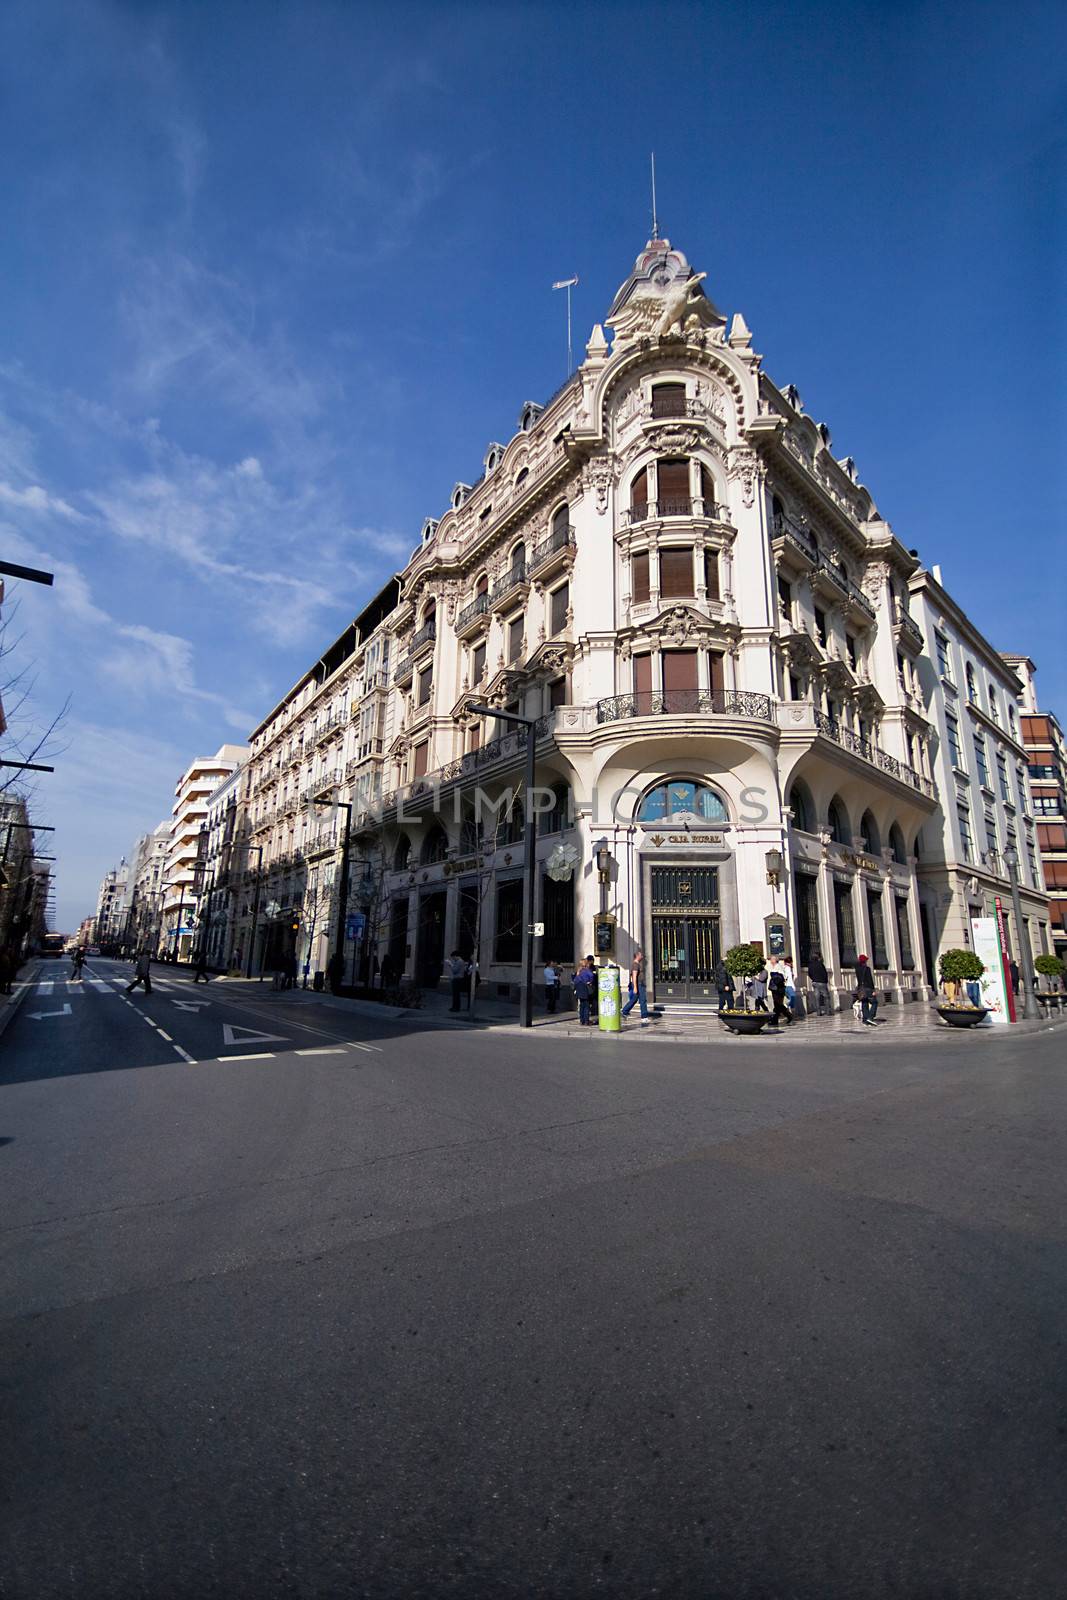 Bank building, no. 2 of Gran via, building of the 20th century french style, Granada, Spain